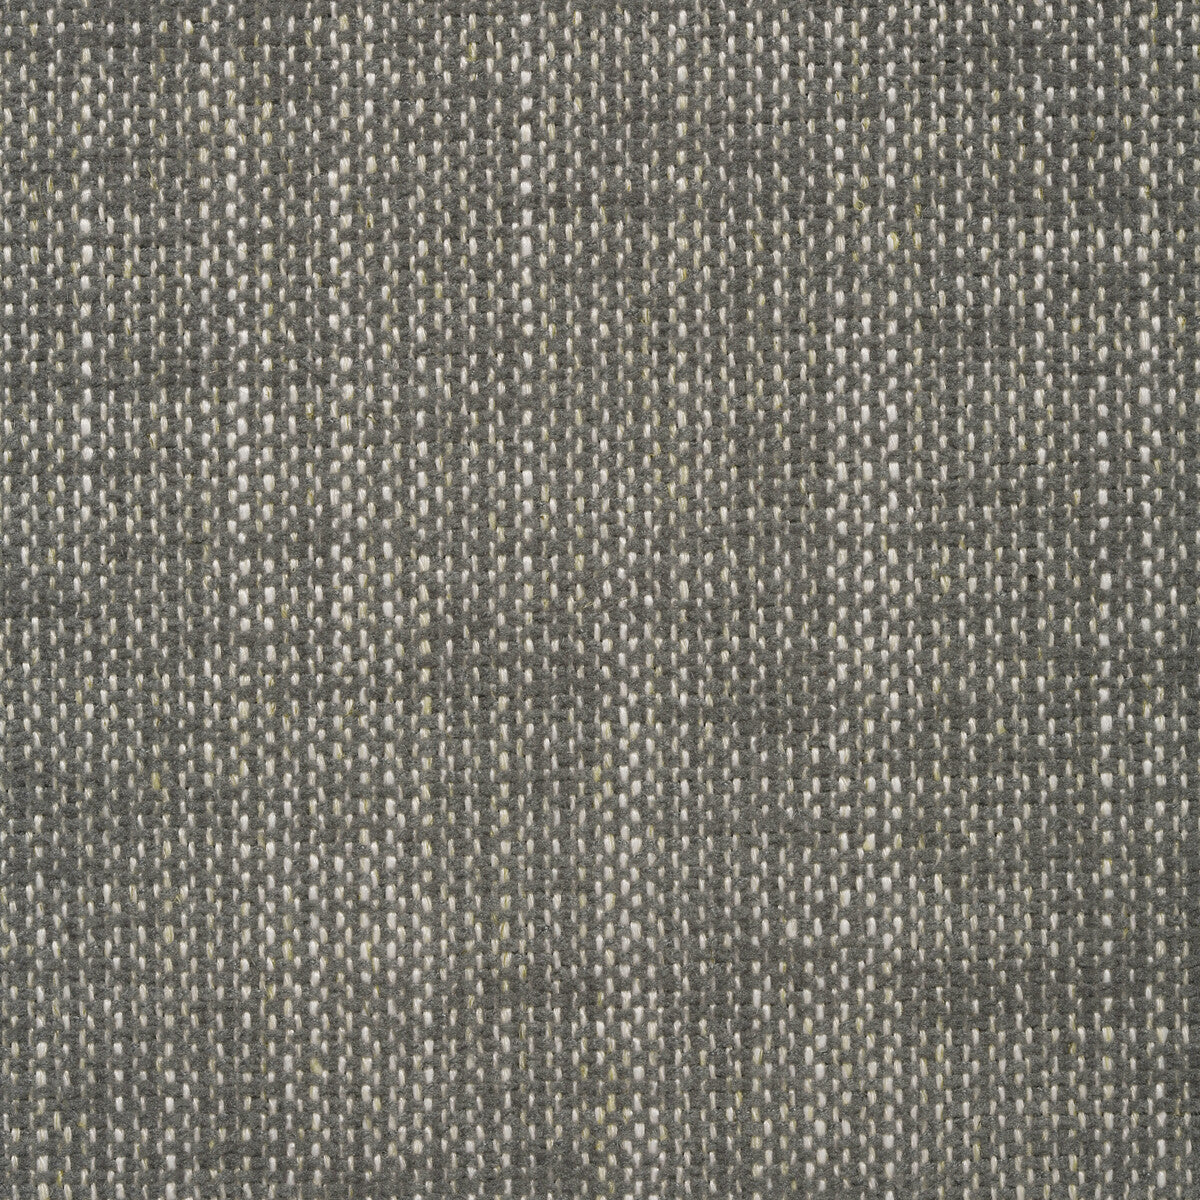 Kravet Contract fabric in 35112-21 color - pattern 35112.21.0 - by Kravet Contract in the Crypton Incase collection